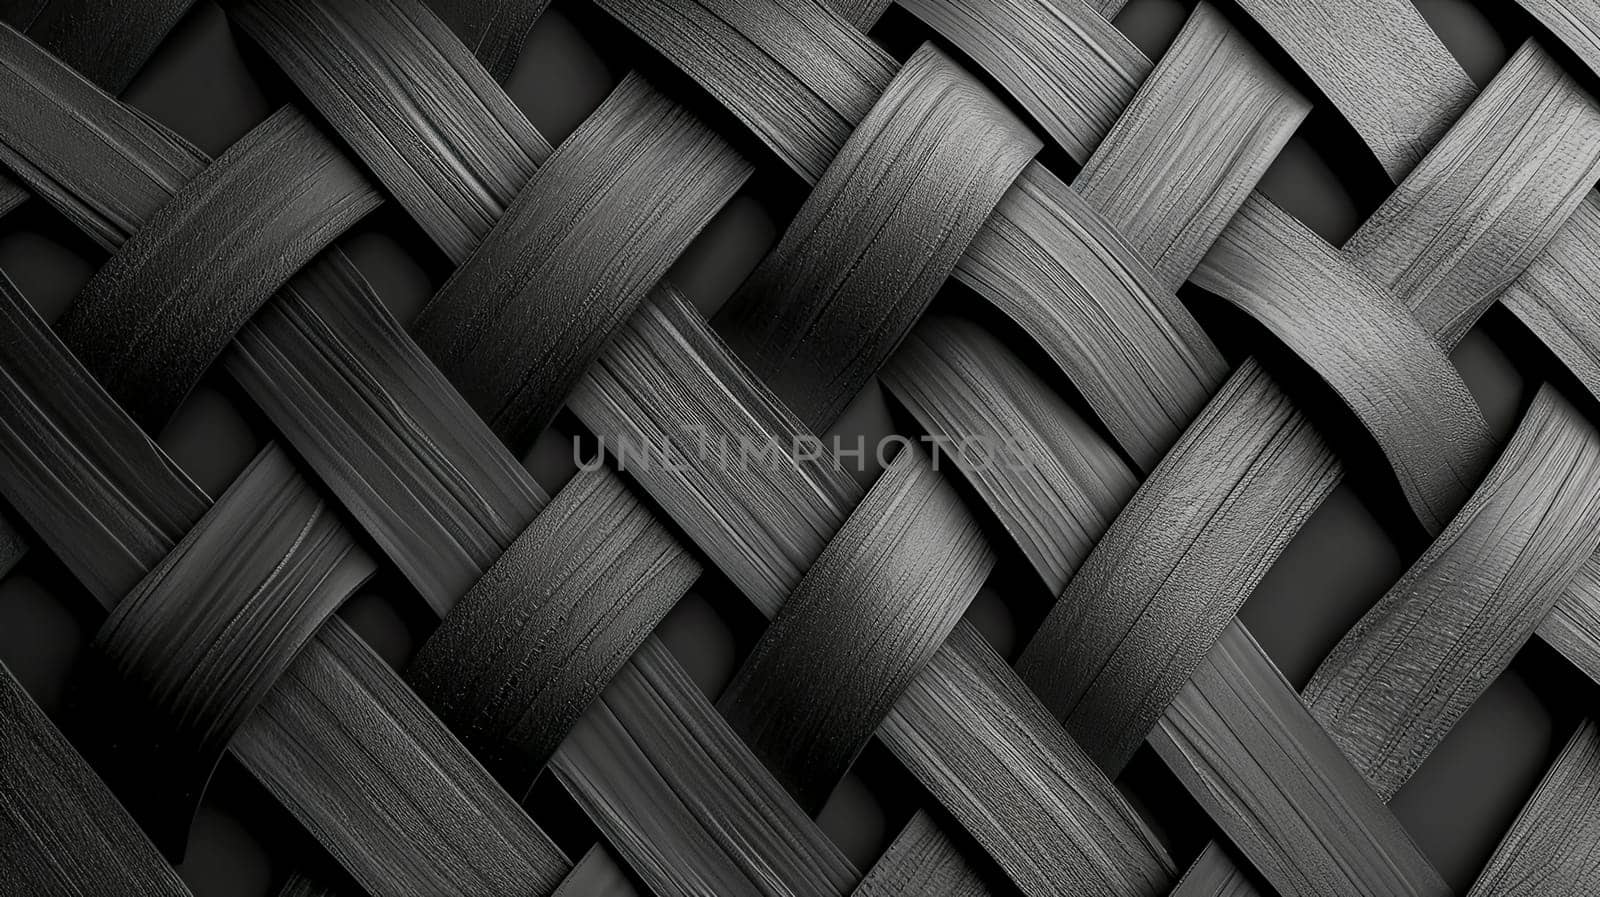 textured pattern created by interwoven black strands with a matte finish. The intricate crosshatch design forms a mesmerizing, basket-weave effect, with each strand showcasing detailed grainy textures